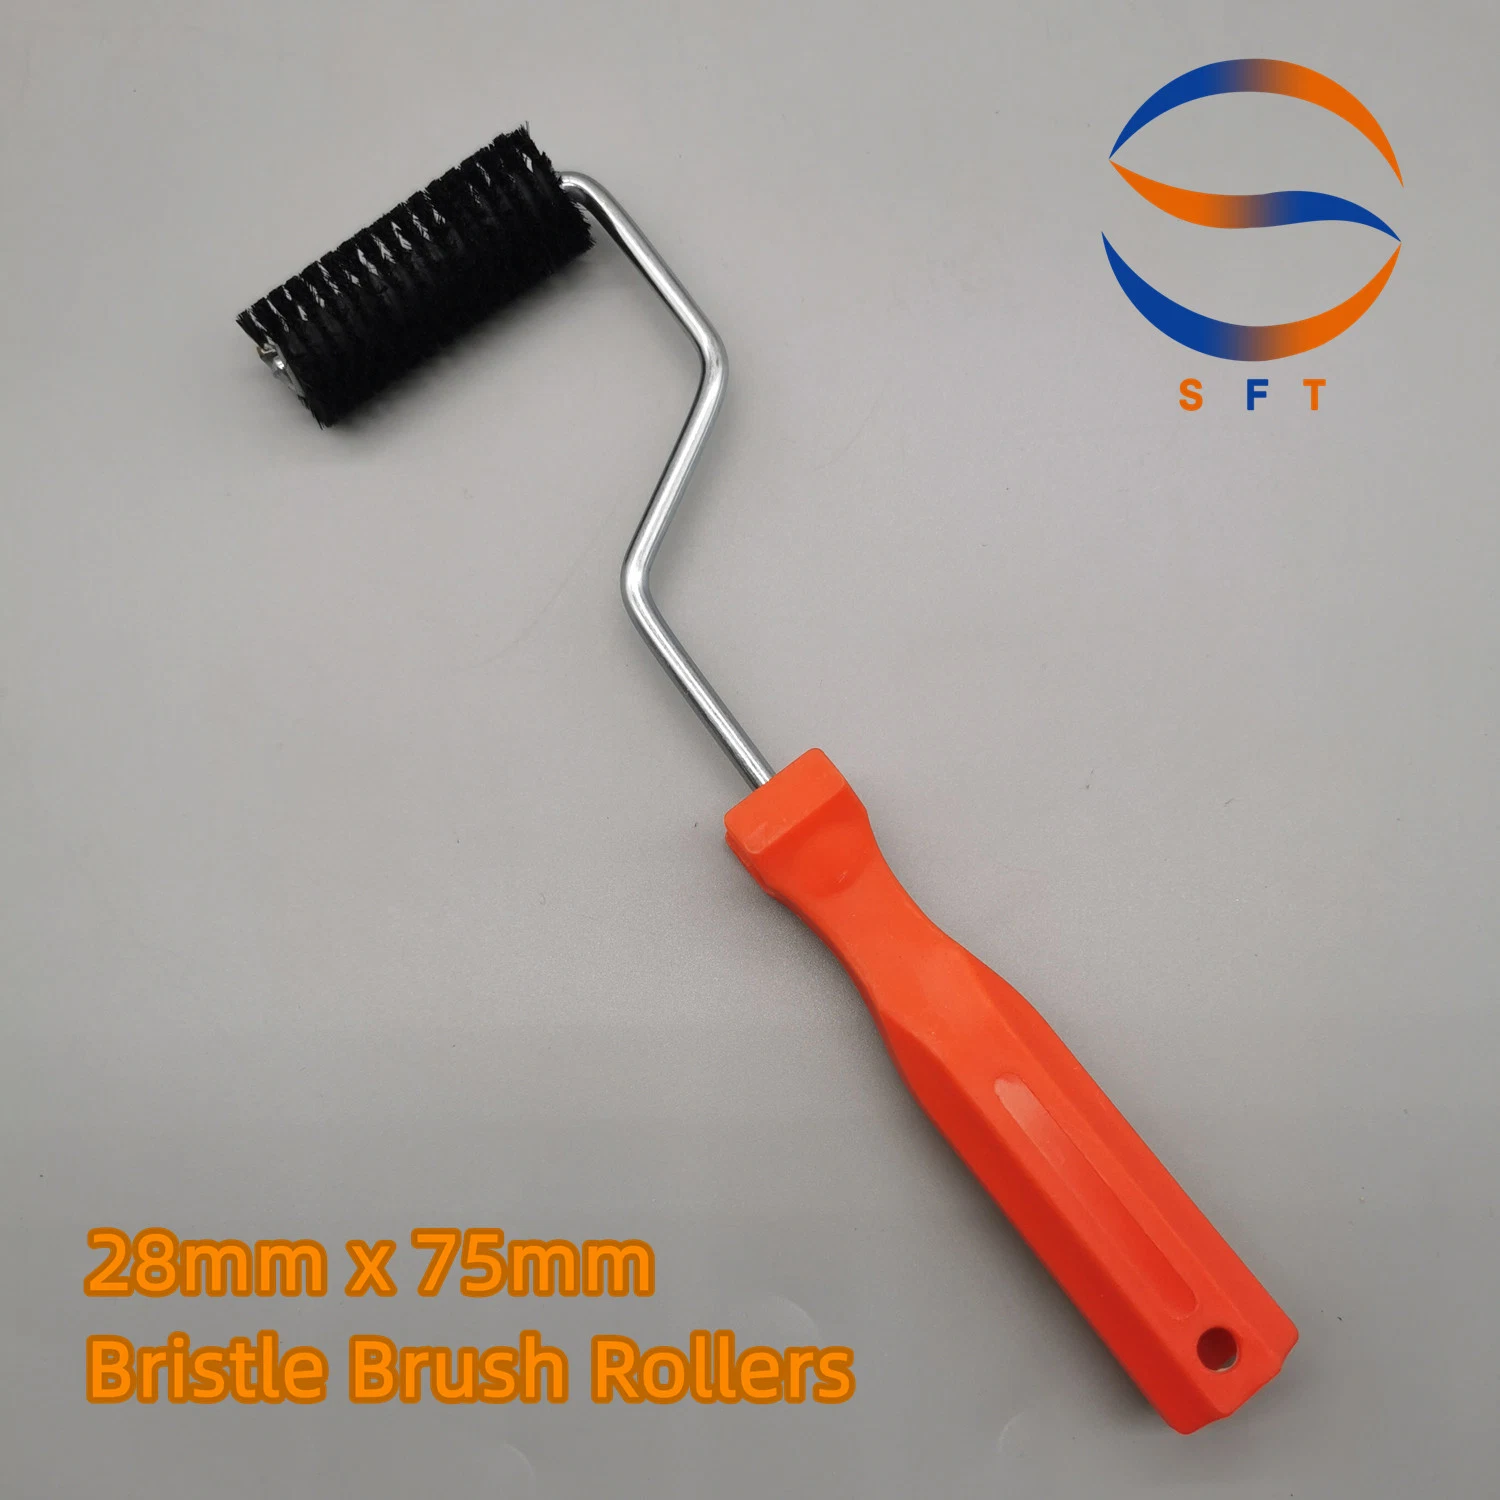 1&prime; &prime; Bristle Brush Rollers Easy to Use and Long Lasting